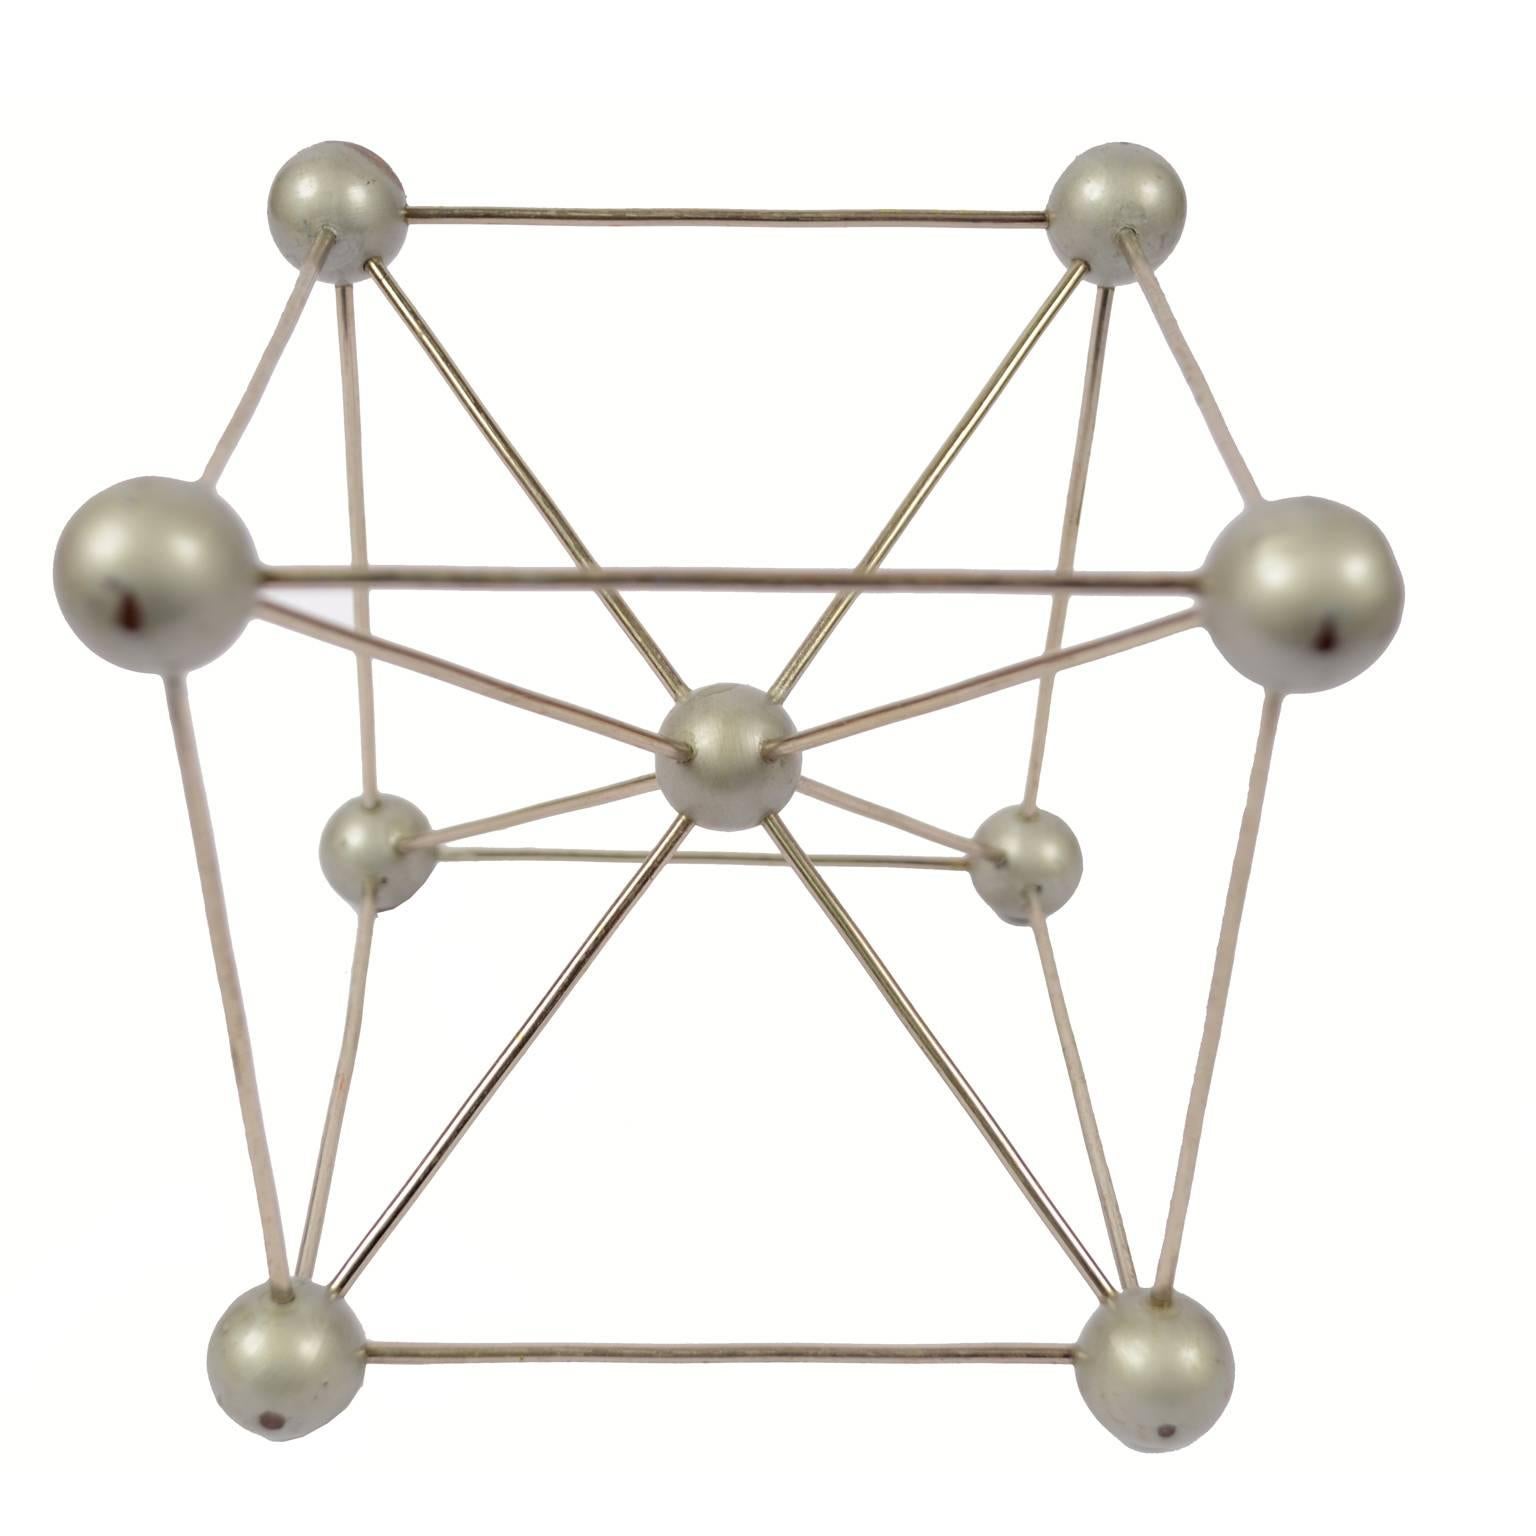 Molecolar structure of iron (Fe) for educational use, metal with wooden spheres grey painted. Czechoslovak manufacture of the 1950s. Very good condition. Measures cm: 12.5 x 12.5.
Shipping in insured by Lloyd's London and the gift box is free (look